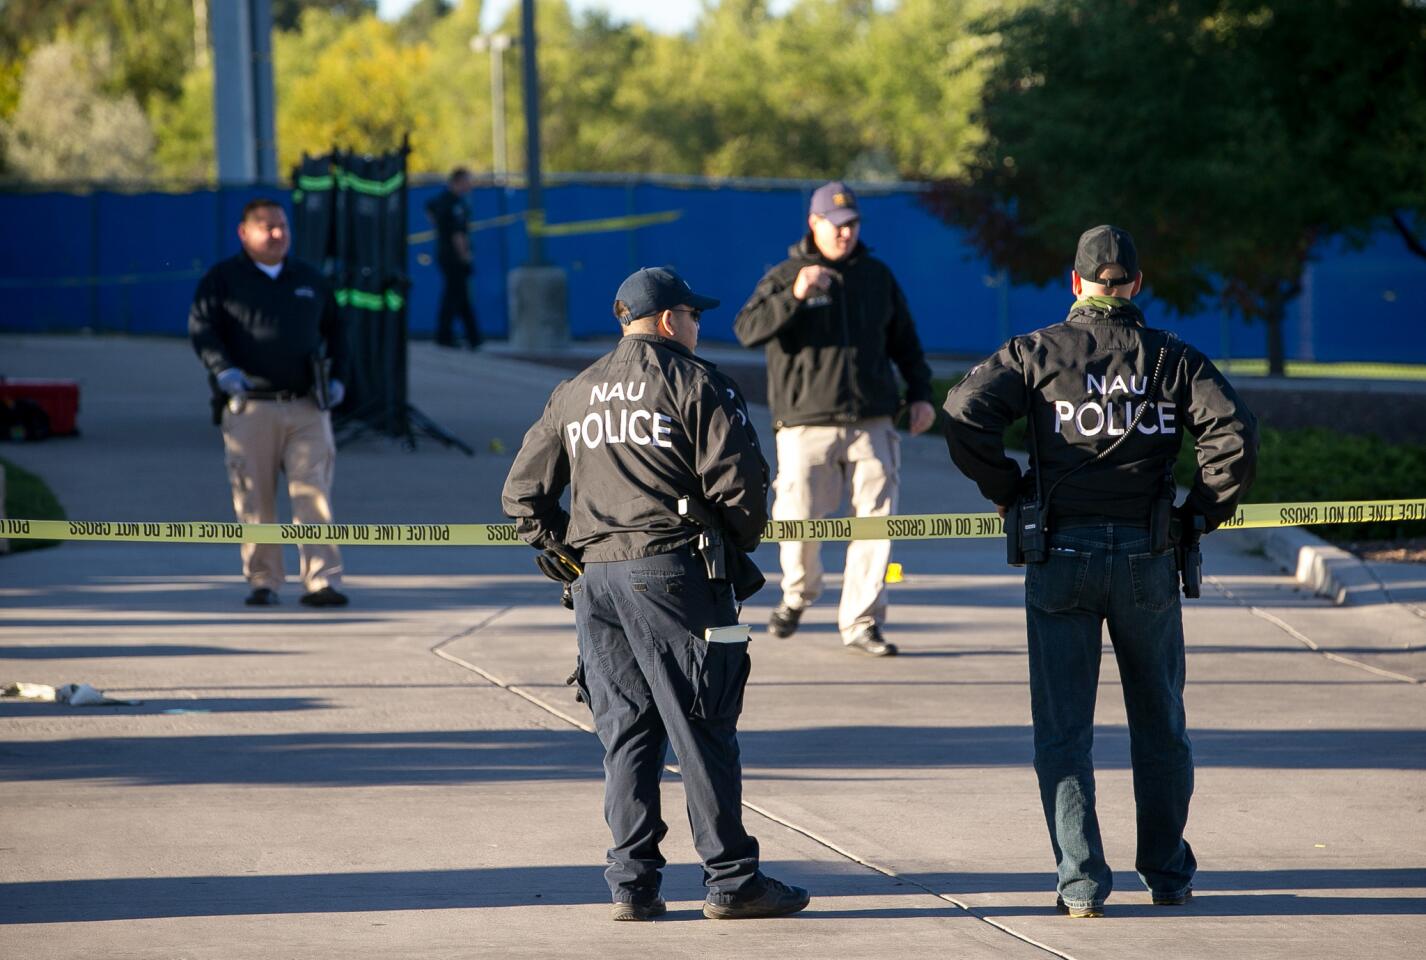 Police officers investigate a shooting at Northern Arizona University campus in Flagstaff, Ariz. An overnight confrontation between two groups of students escalated into gunfire early Friday when a student killed one person and wounded three others.